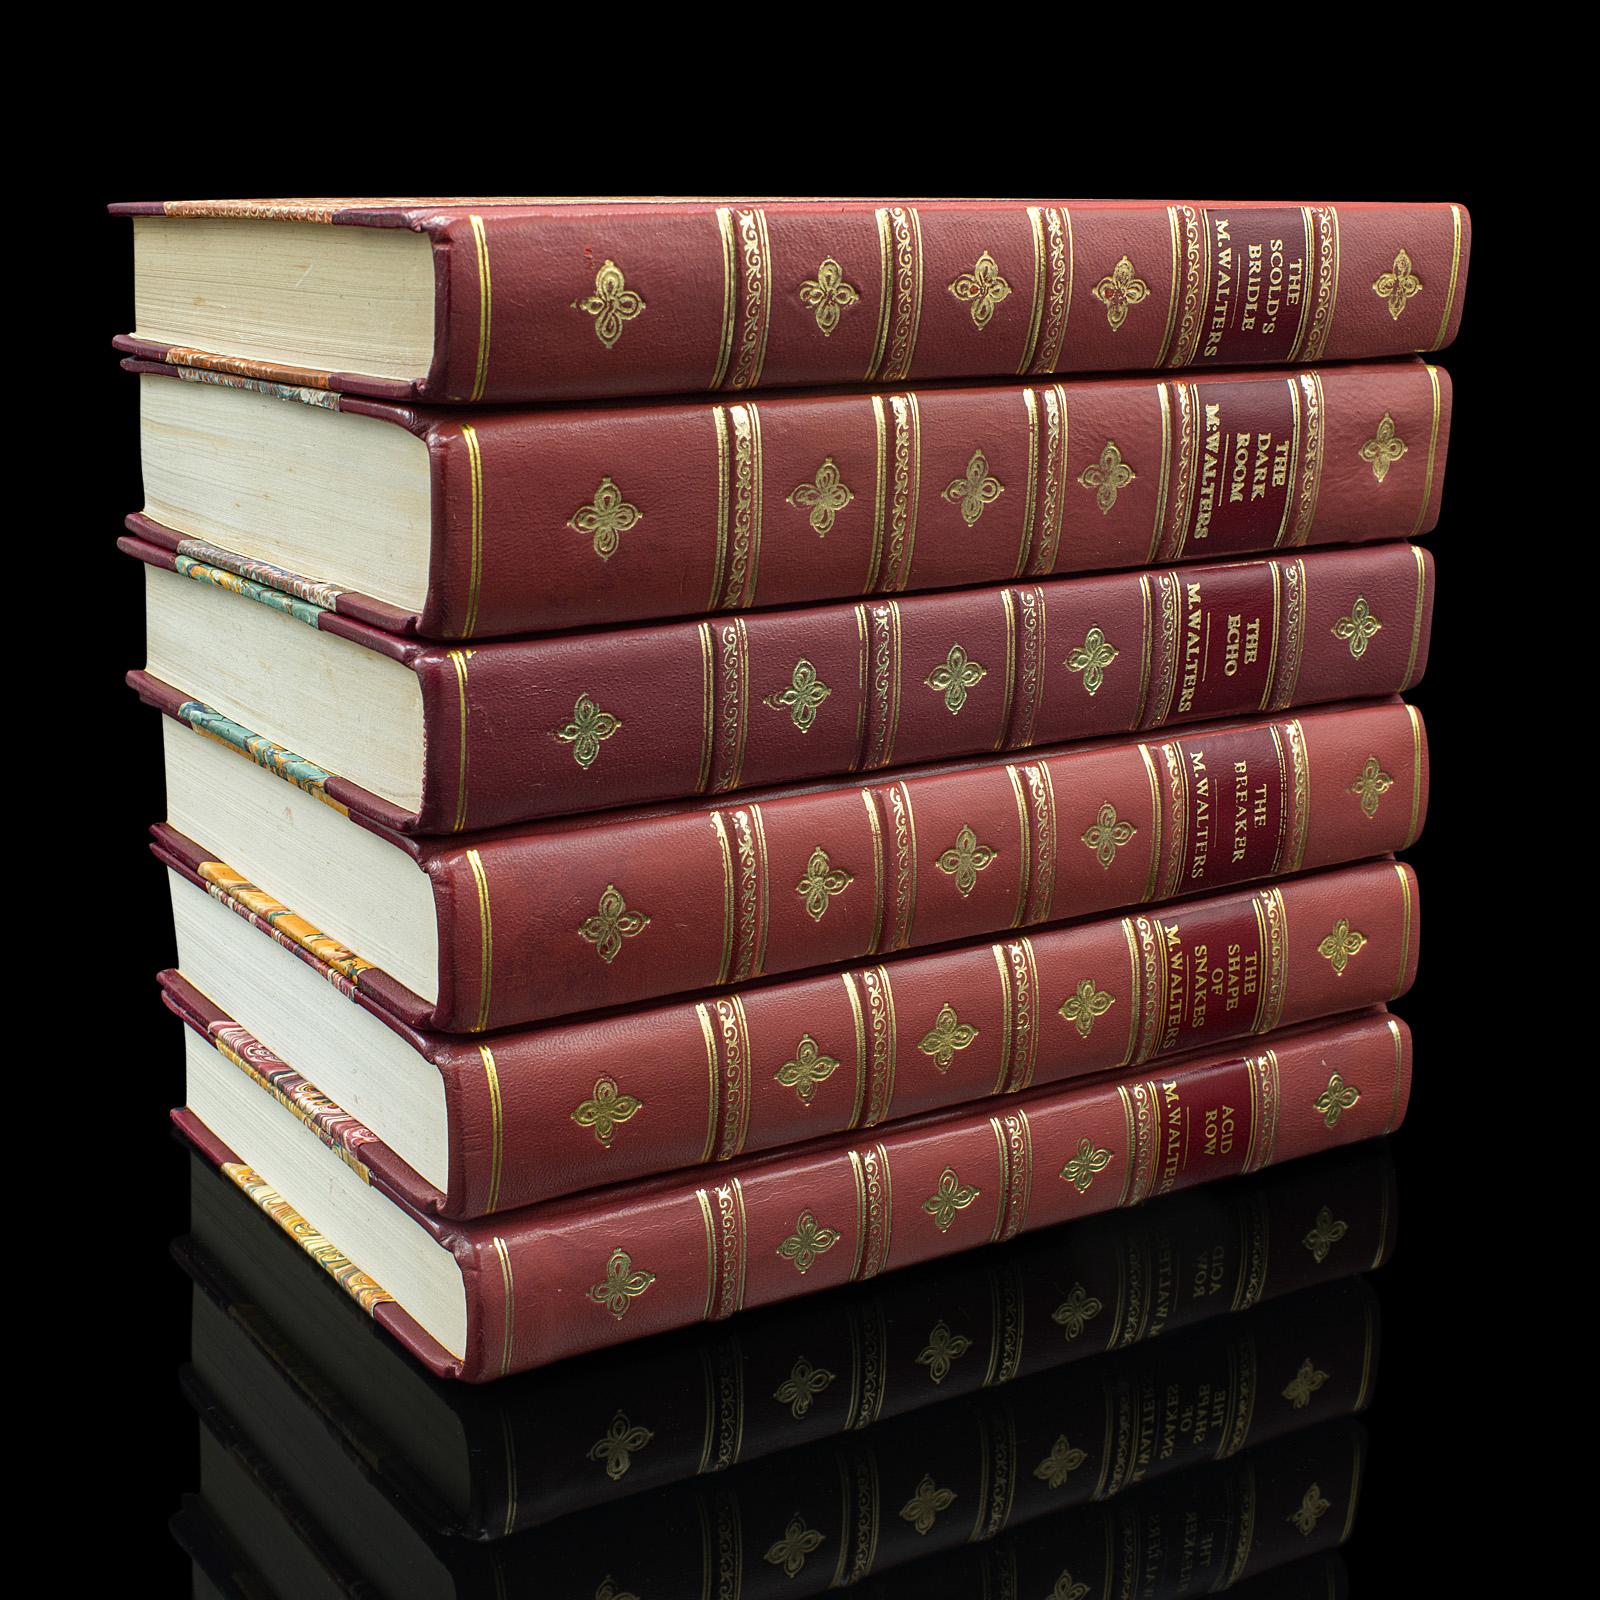 This is a set of 6 First Edition novels by Minette Walters. An English language, author signed hard-bound collection of crime writing, dating to the turn of the 21st century.

An award-winning author, Minette Walters (September 1949) has written